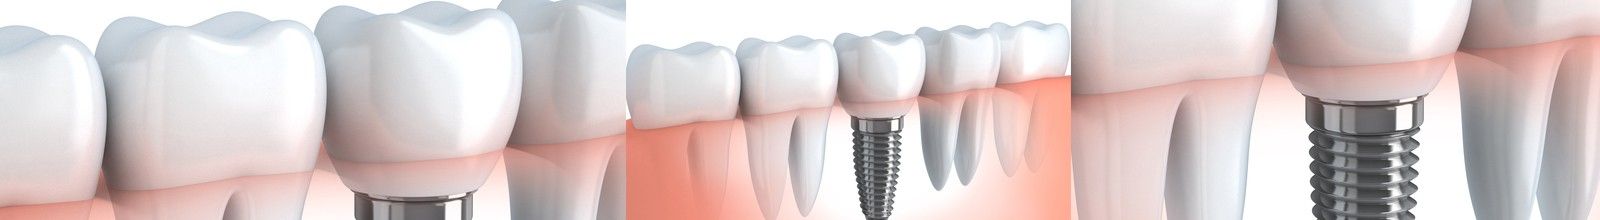 Implant Supported Removable Denture